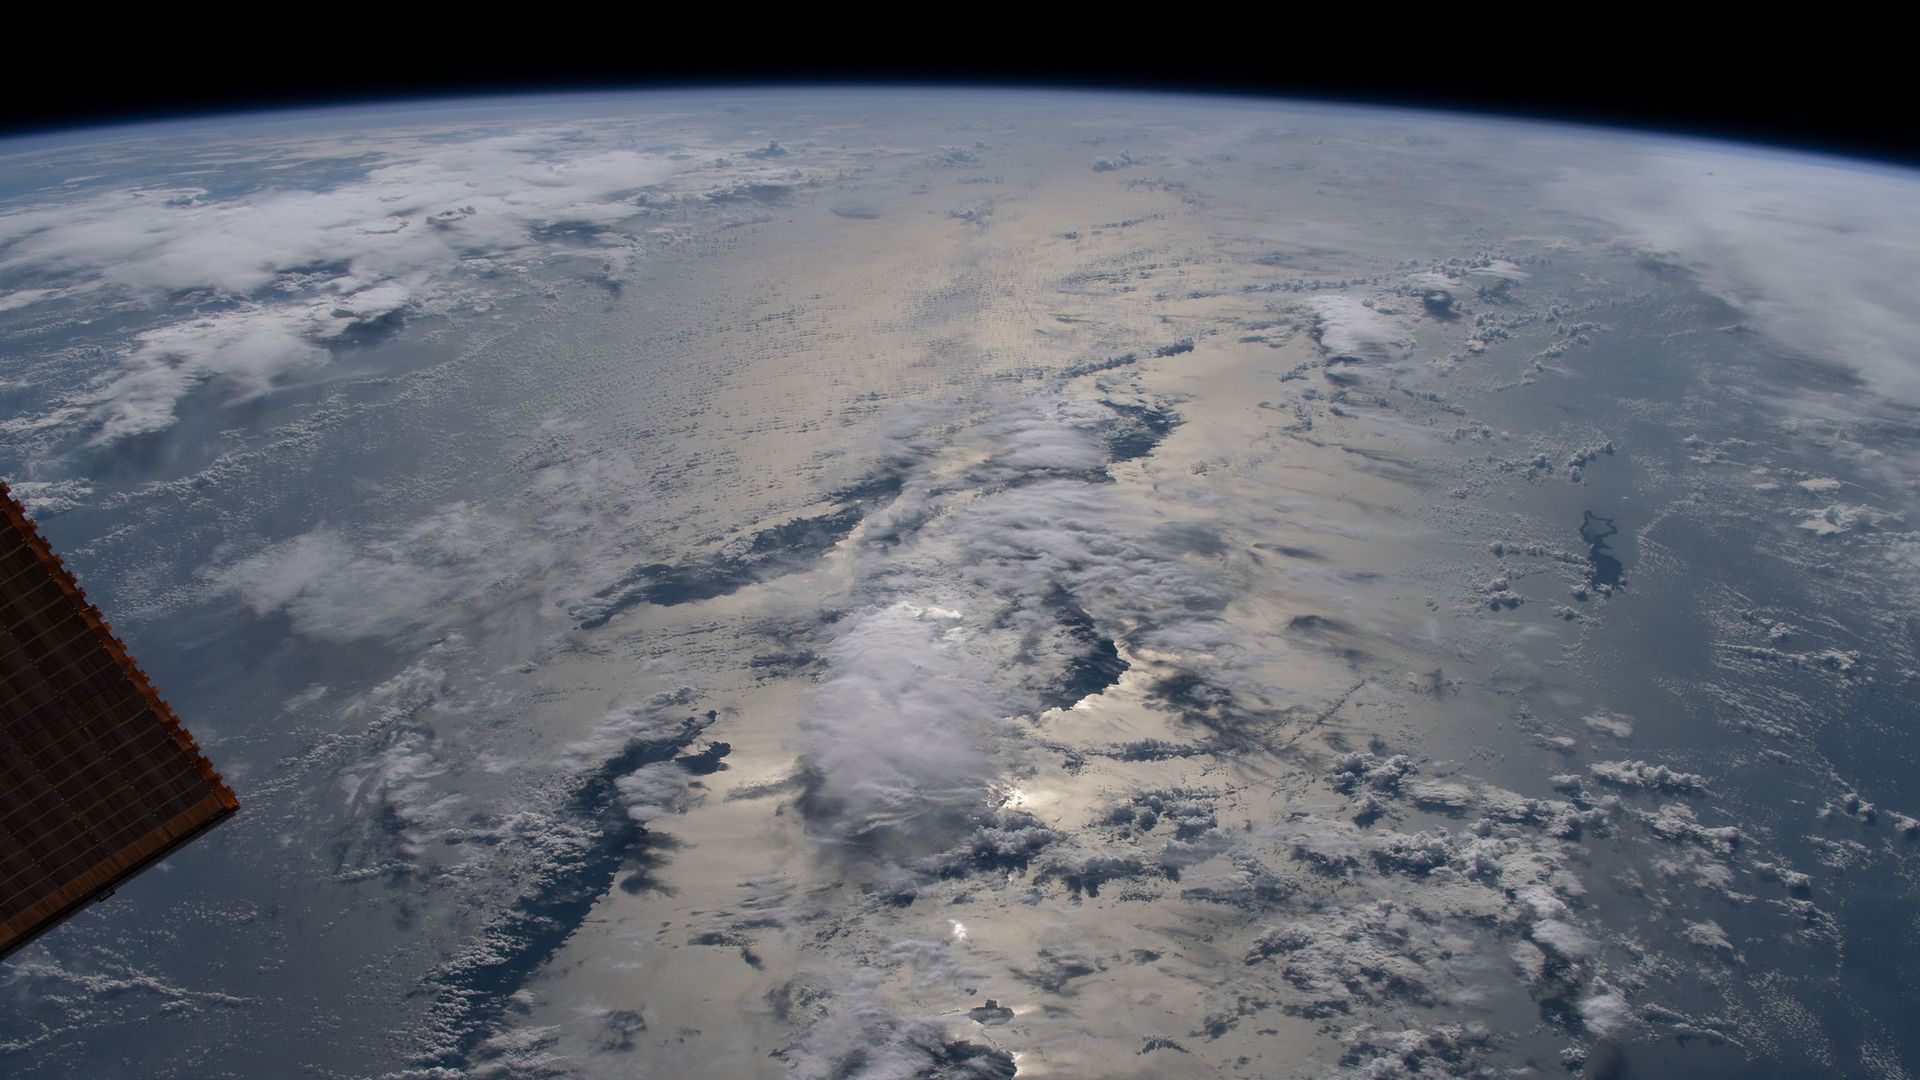 A view of the Earth from the ISS